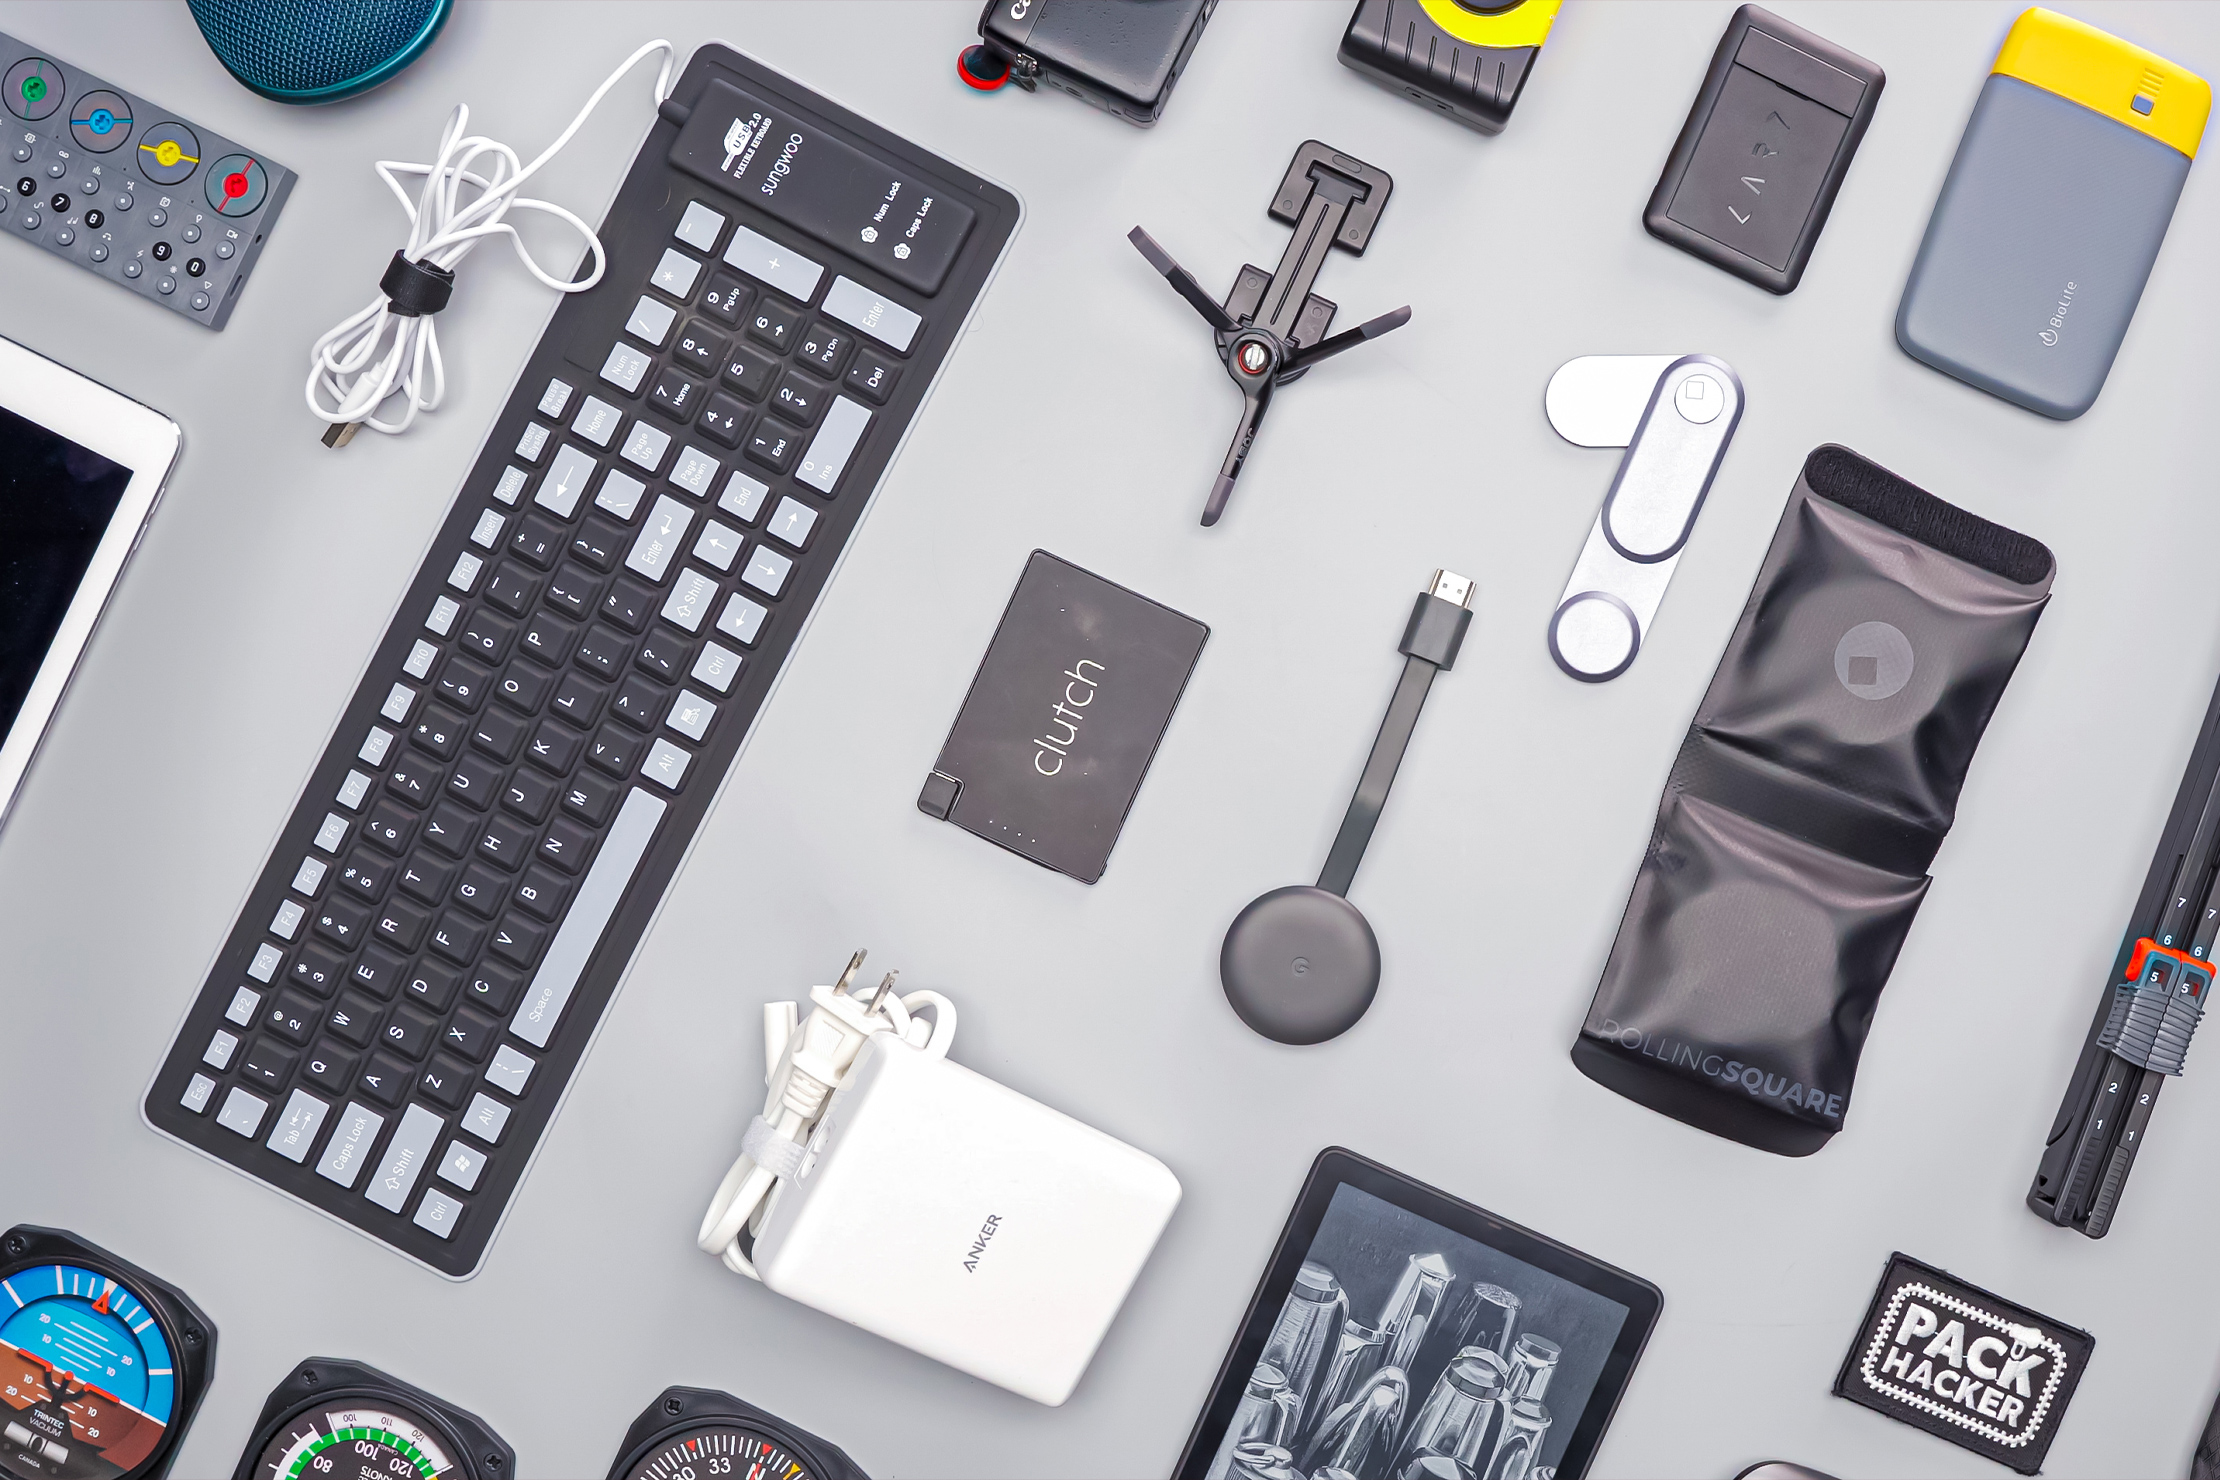 Top 10 Cool Office Gadgets & Accessories to Increase Productivity 